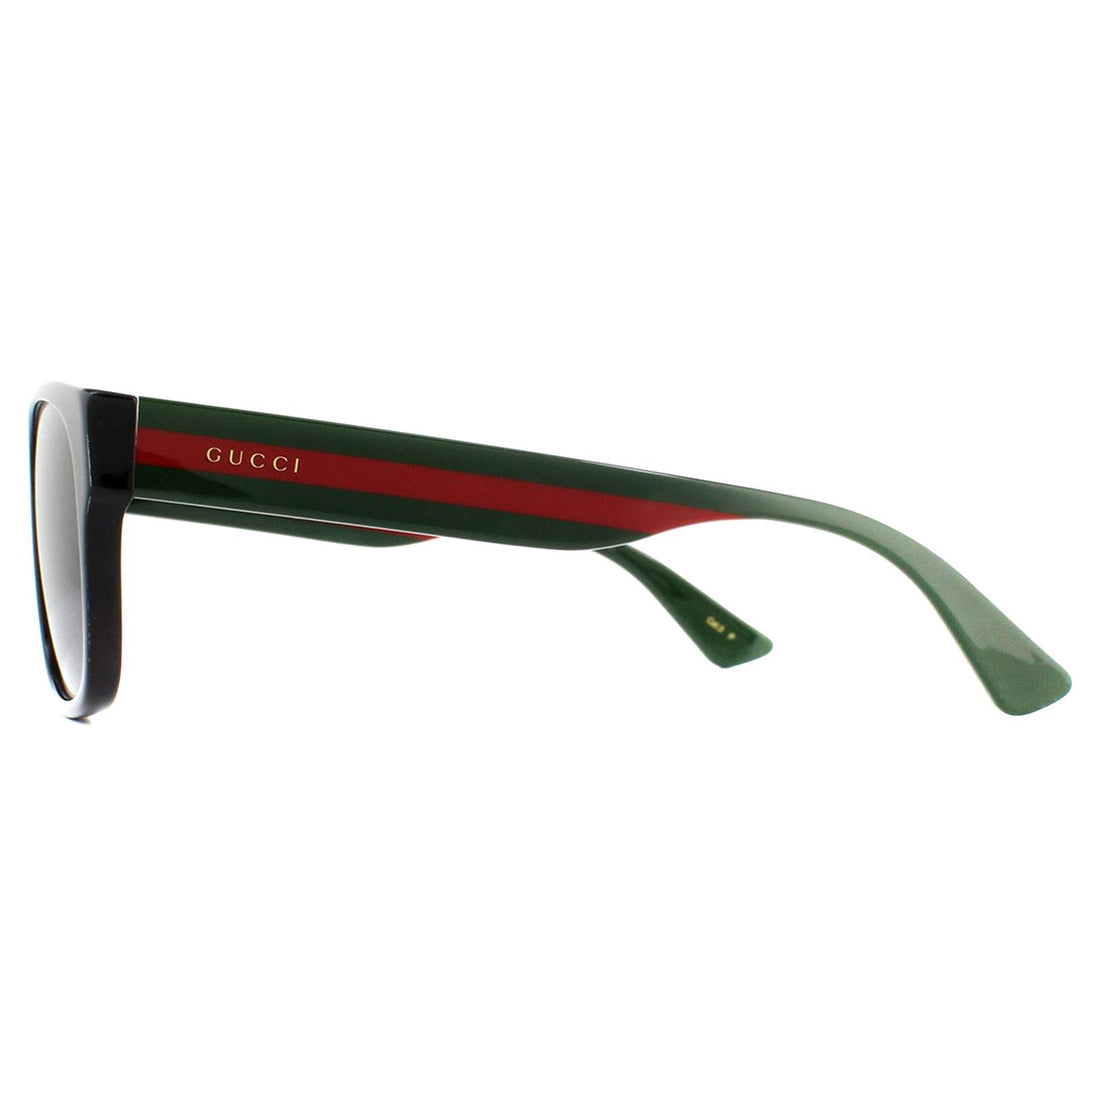 Gucci Sunglasses GG0341S 002 Black with Green and Red Stripe Grey Polarized